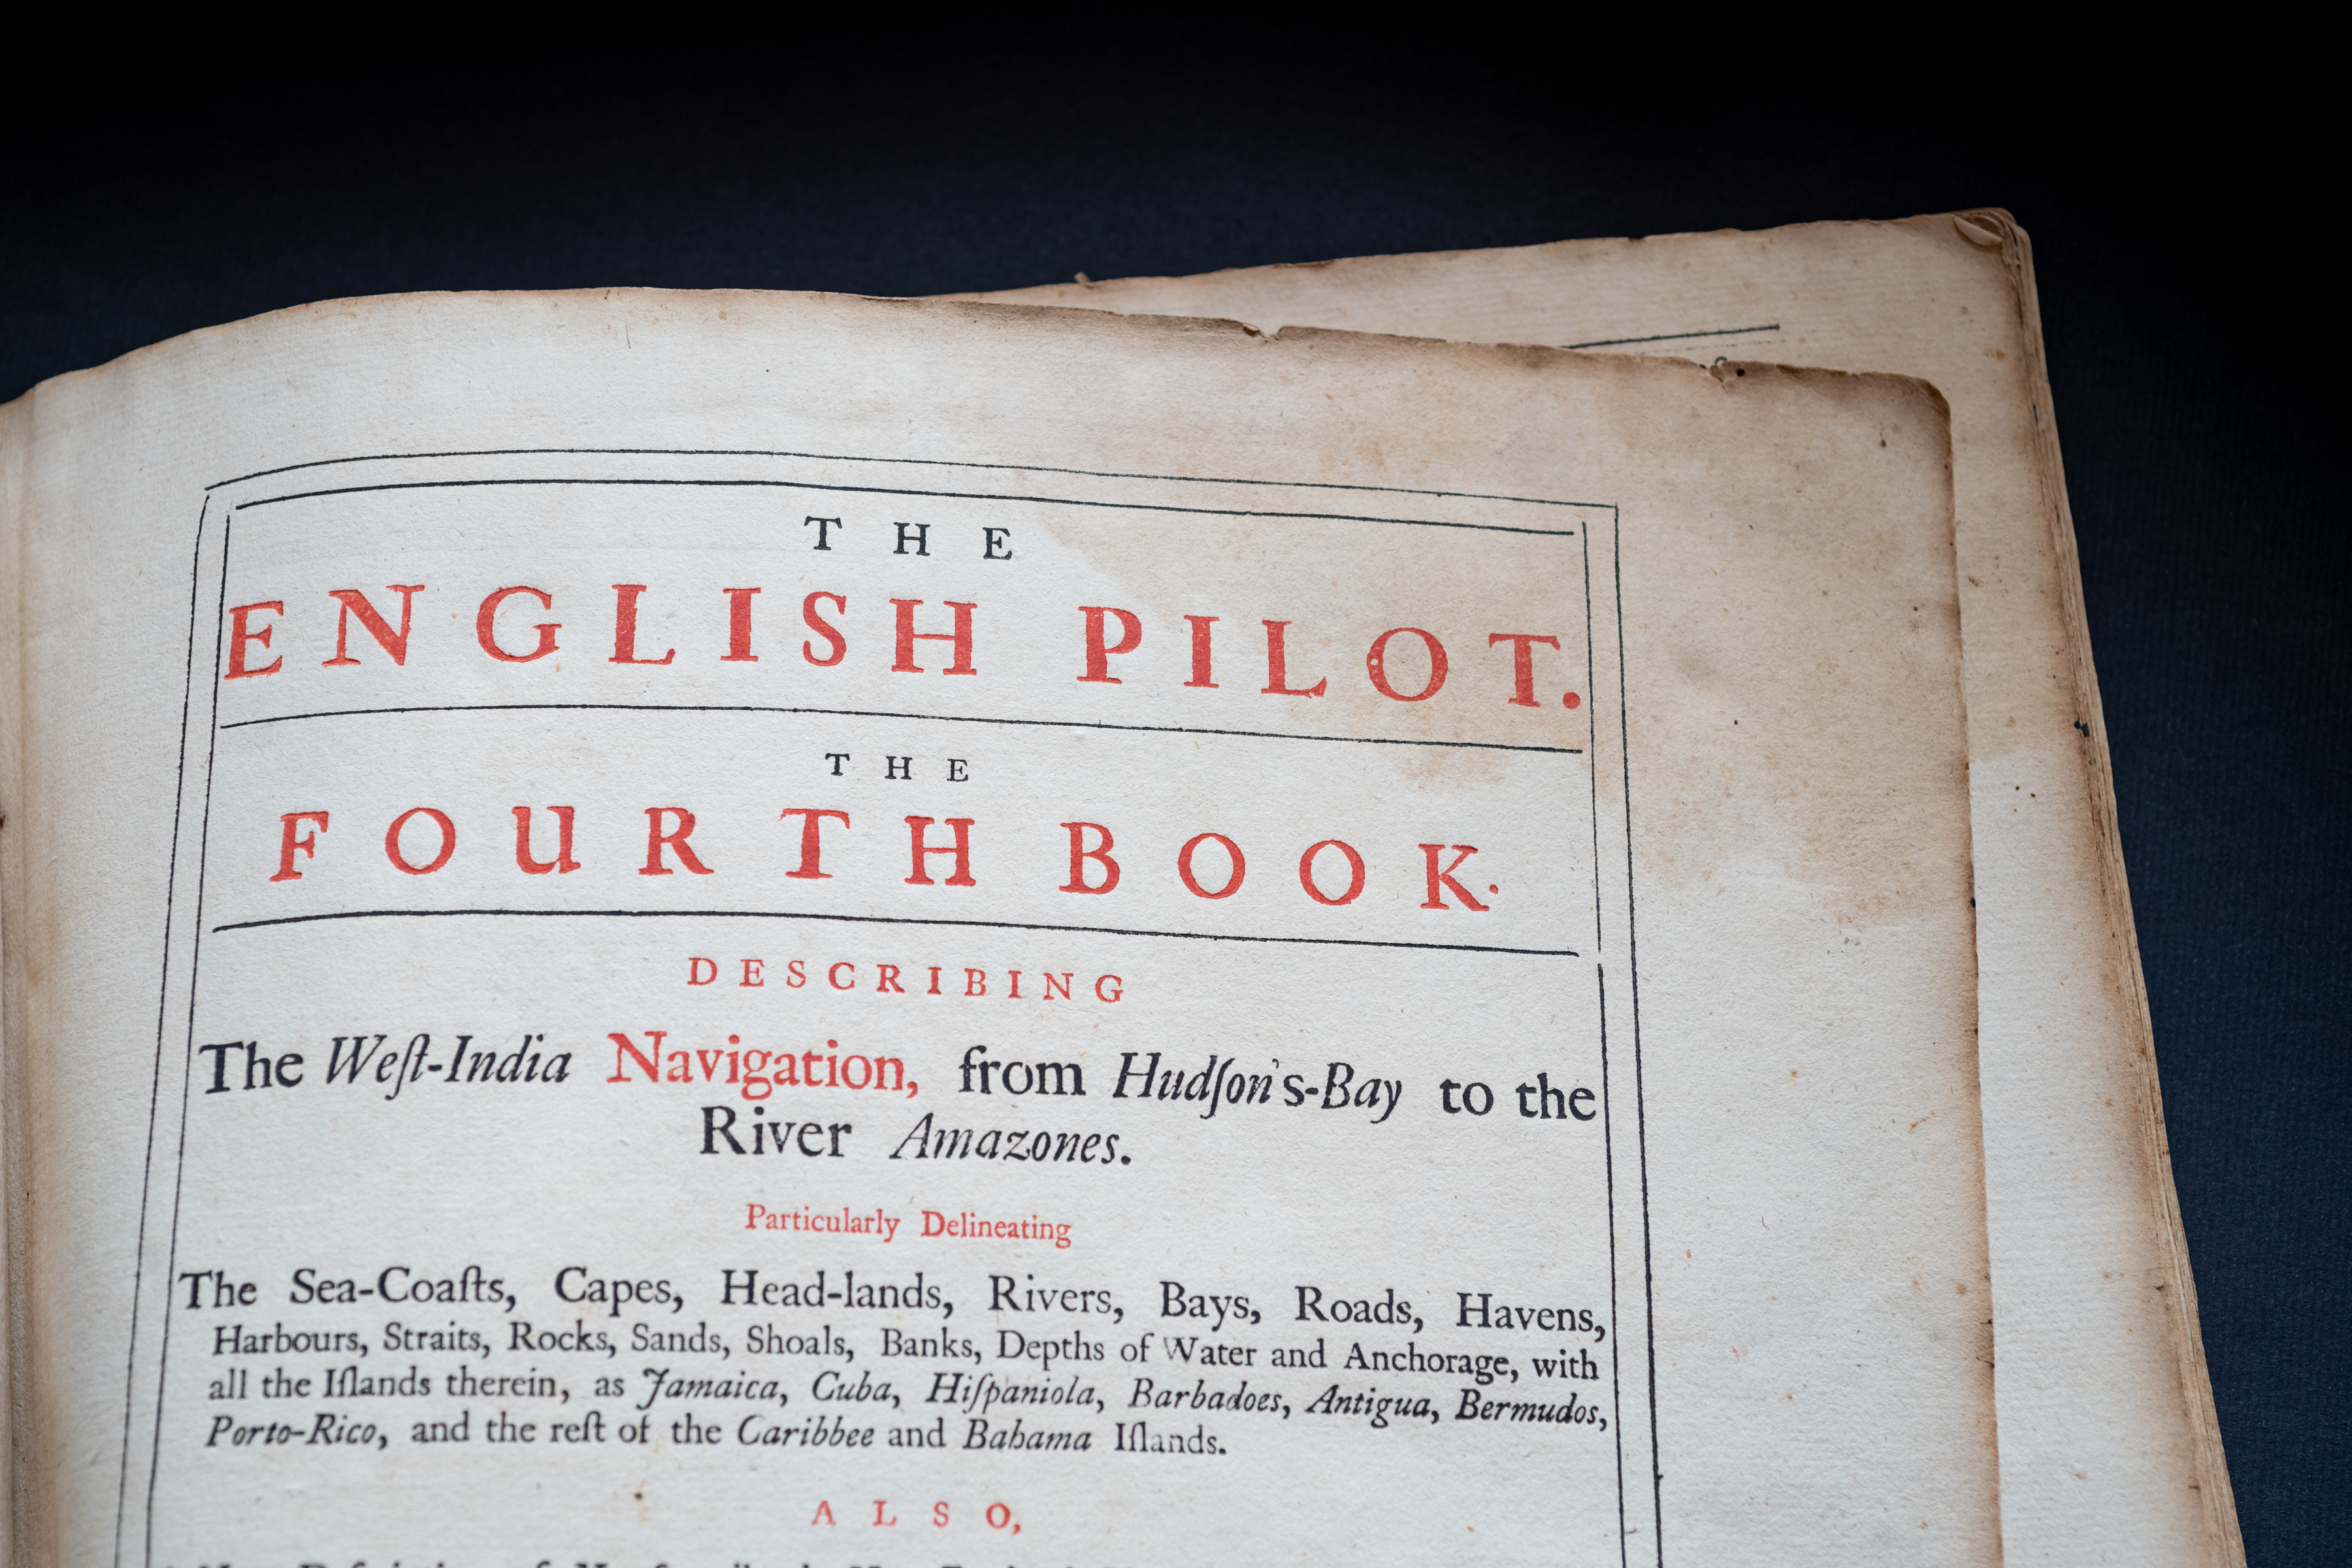 Detail of a printed book shows title page with English text "The English Pilot. The Fourth Book describing the West India Navigation, from Hudson's Bay to the River Amazones" in red ink.